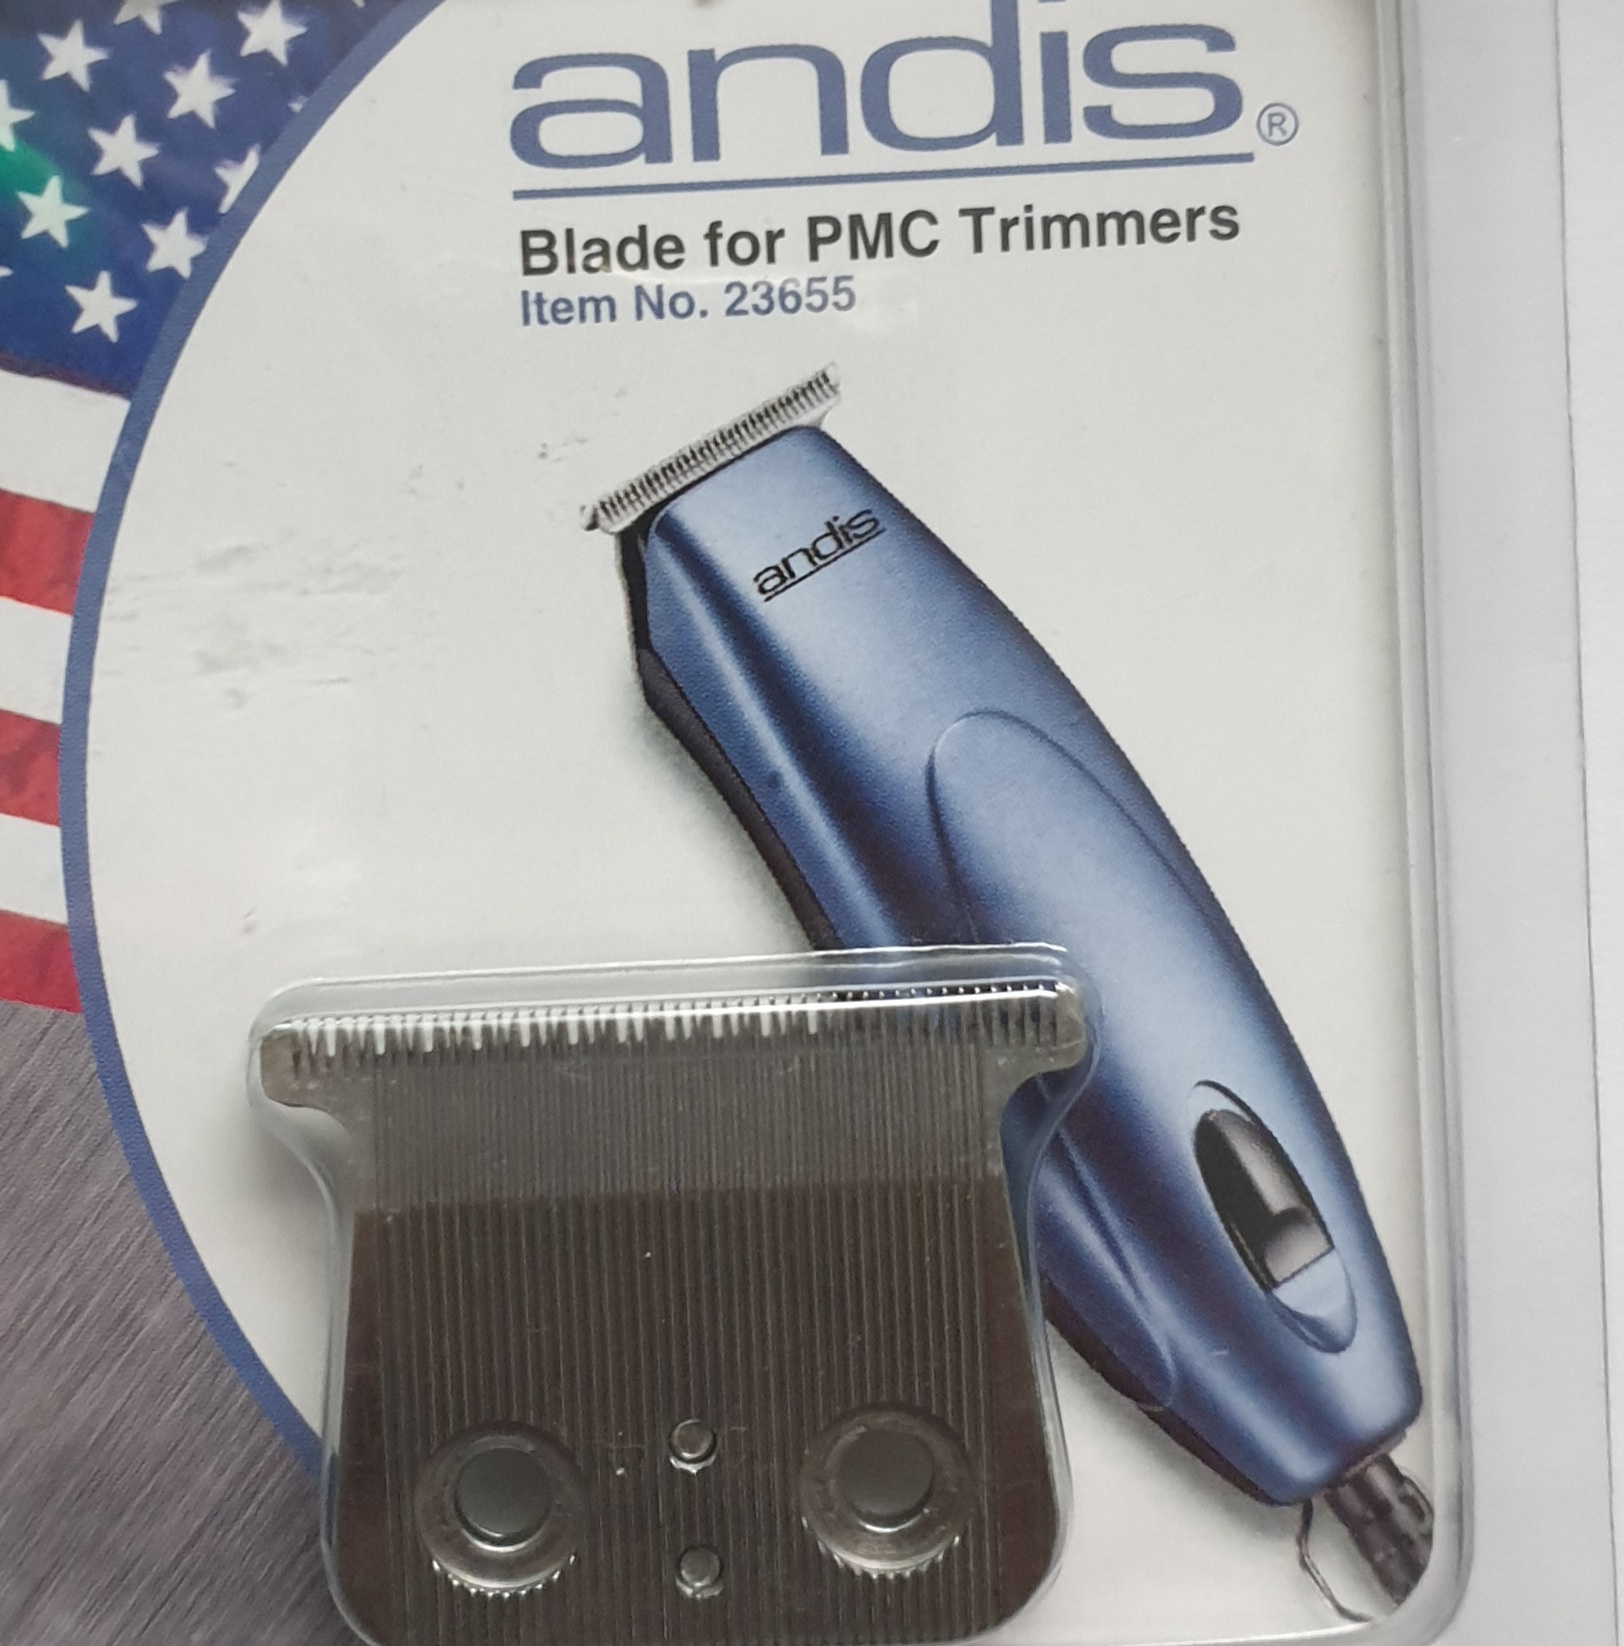 Andis Blade for PMC Trimmers item No:23655